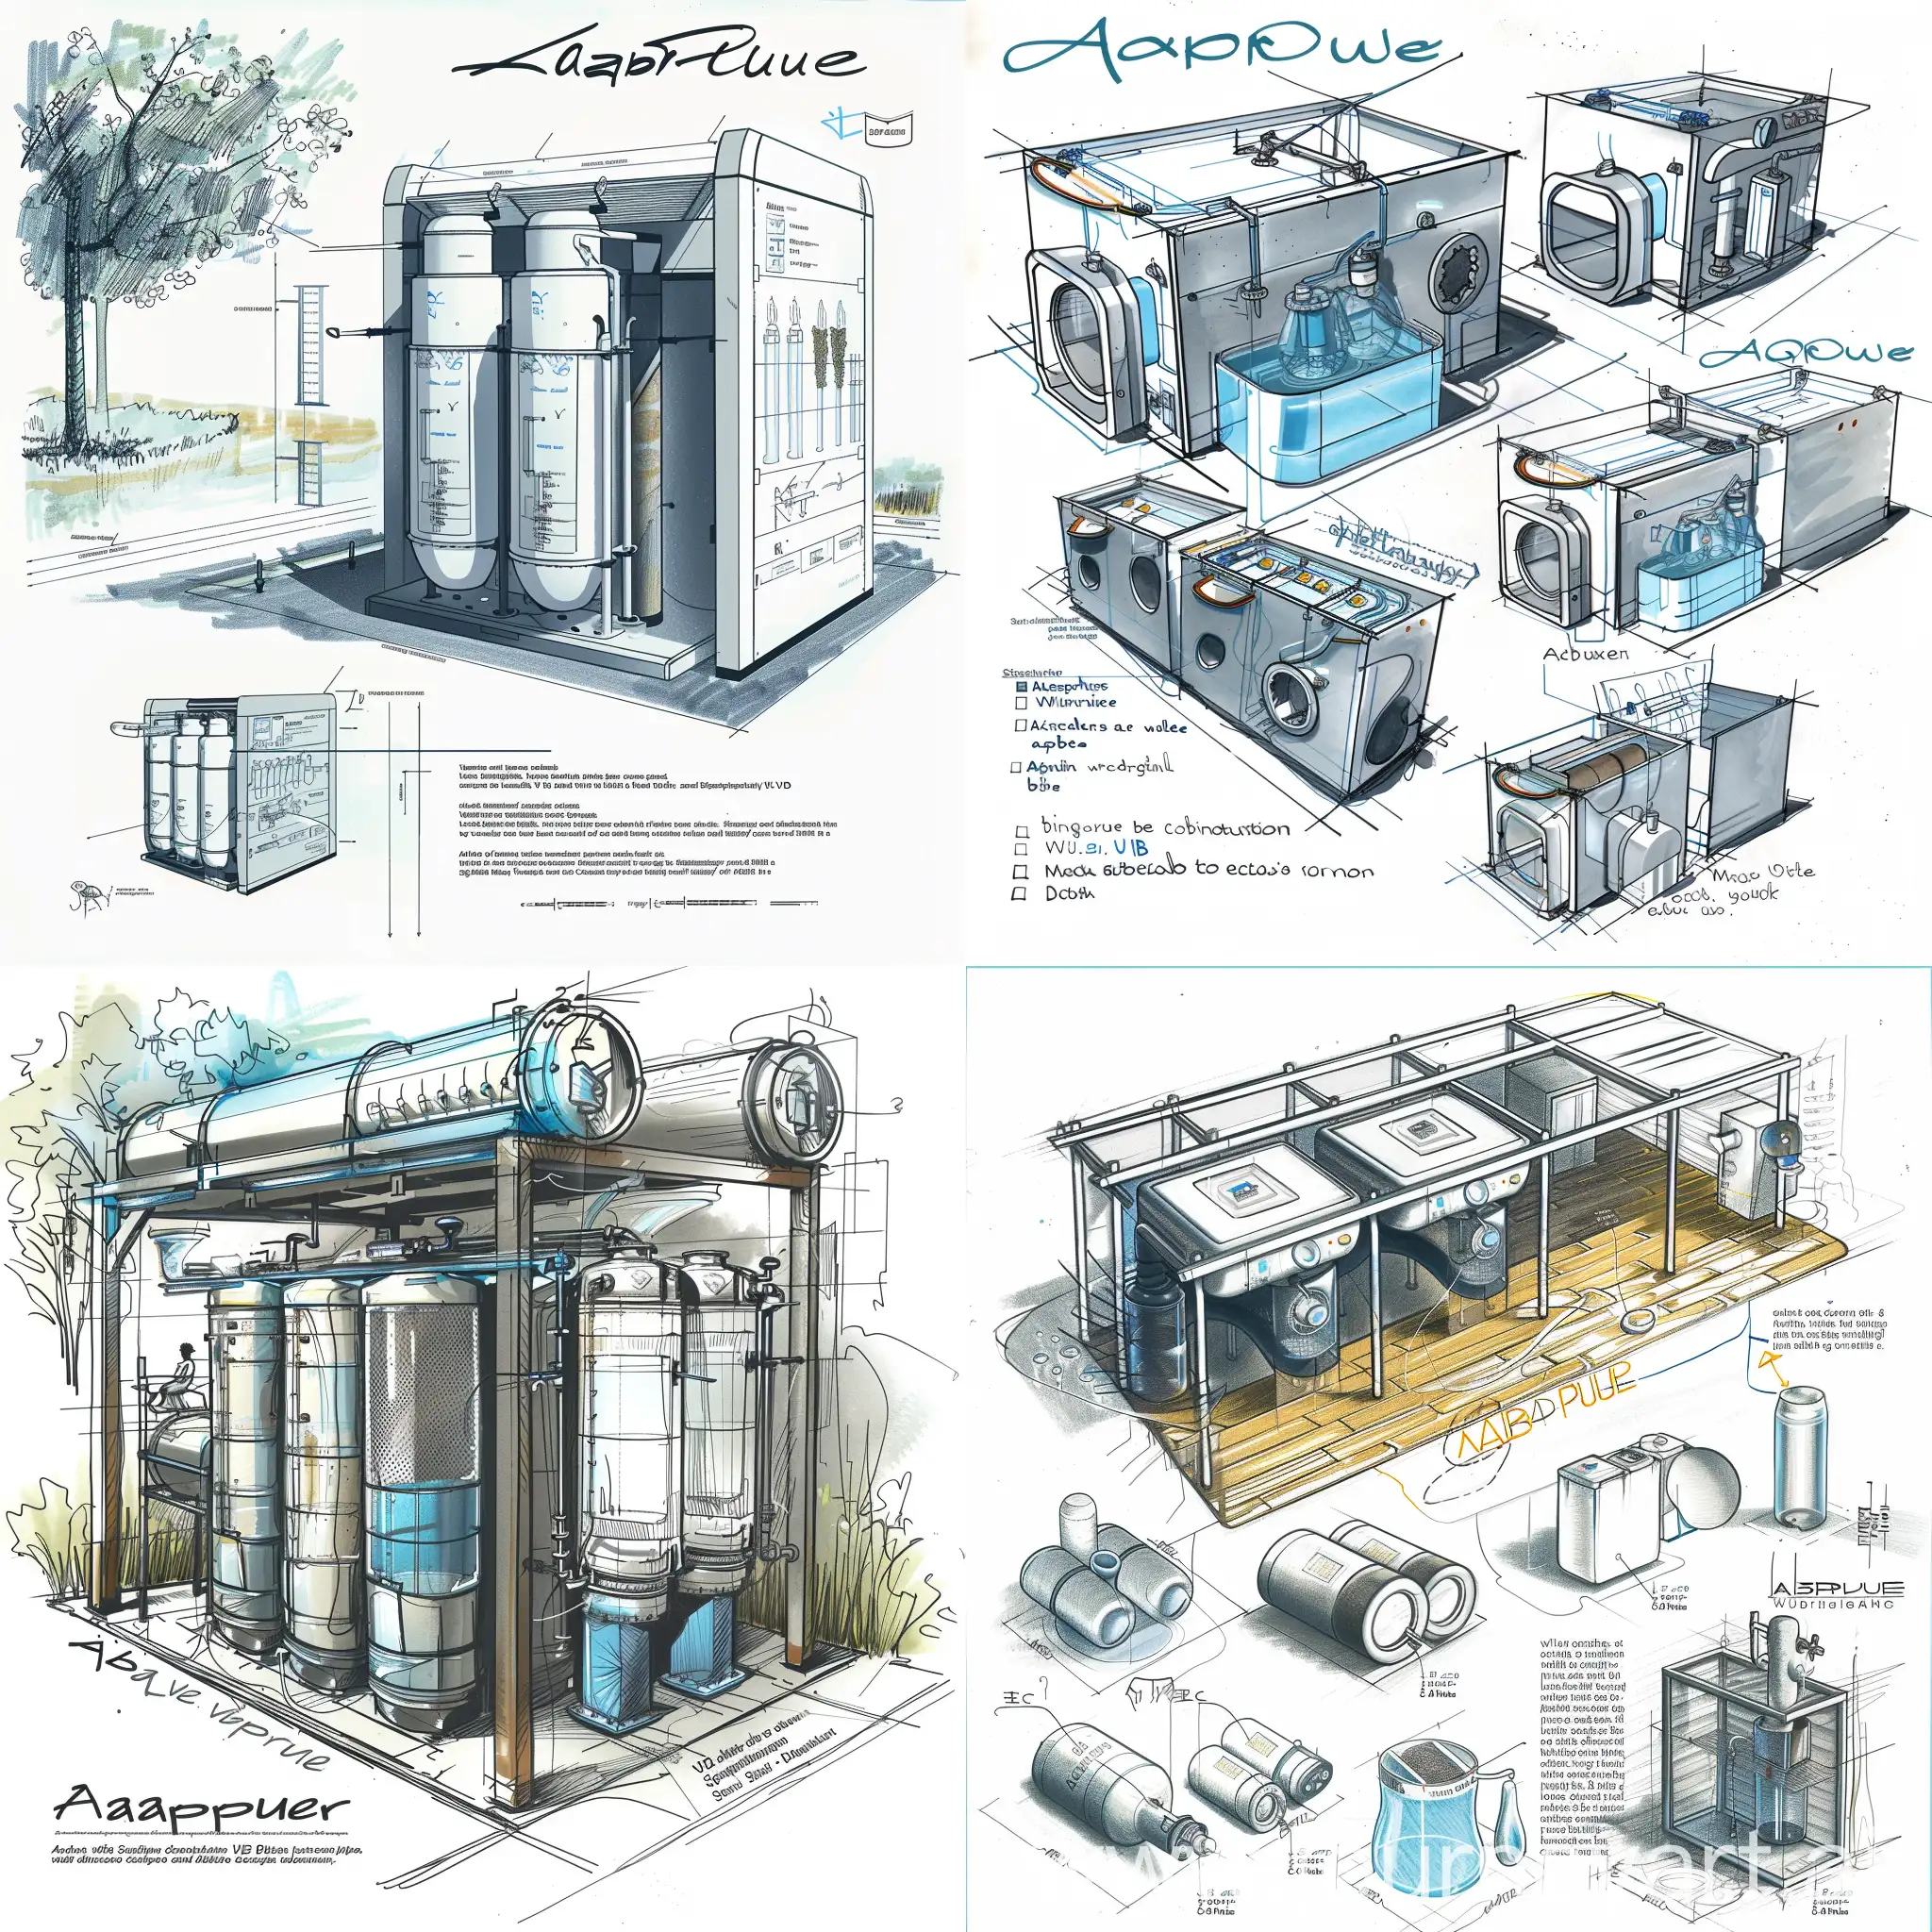 The AquaPure water purification system consists of a multi-stage filtration process, including sedimentation, activated charcoal filtration, and UV disinfection. The system is designed to be modular and customizable, allowing for easy integration into existing water infrastructure. The accompanying concept sketch illustrates the system's components, operation, and placement within the community, highlighting its user-friendly design and functionality. Additionally, detailed specifications for hardware components, such as filtration units, UV disinfection modules, and storage tanks, are provided, along with software requirements for system monitoring and maintenance.